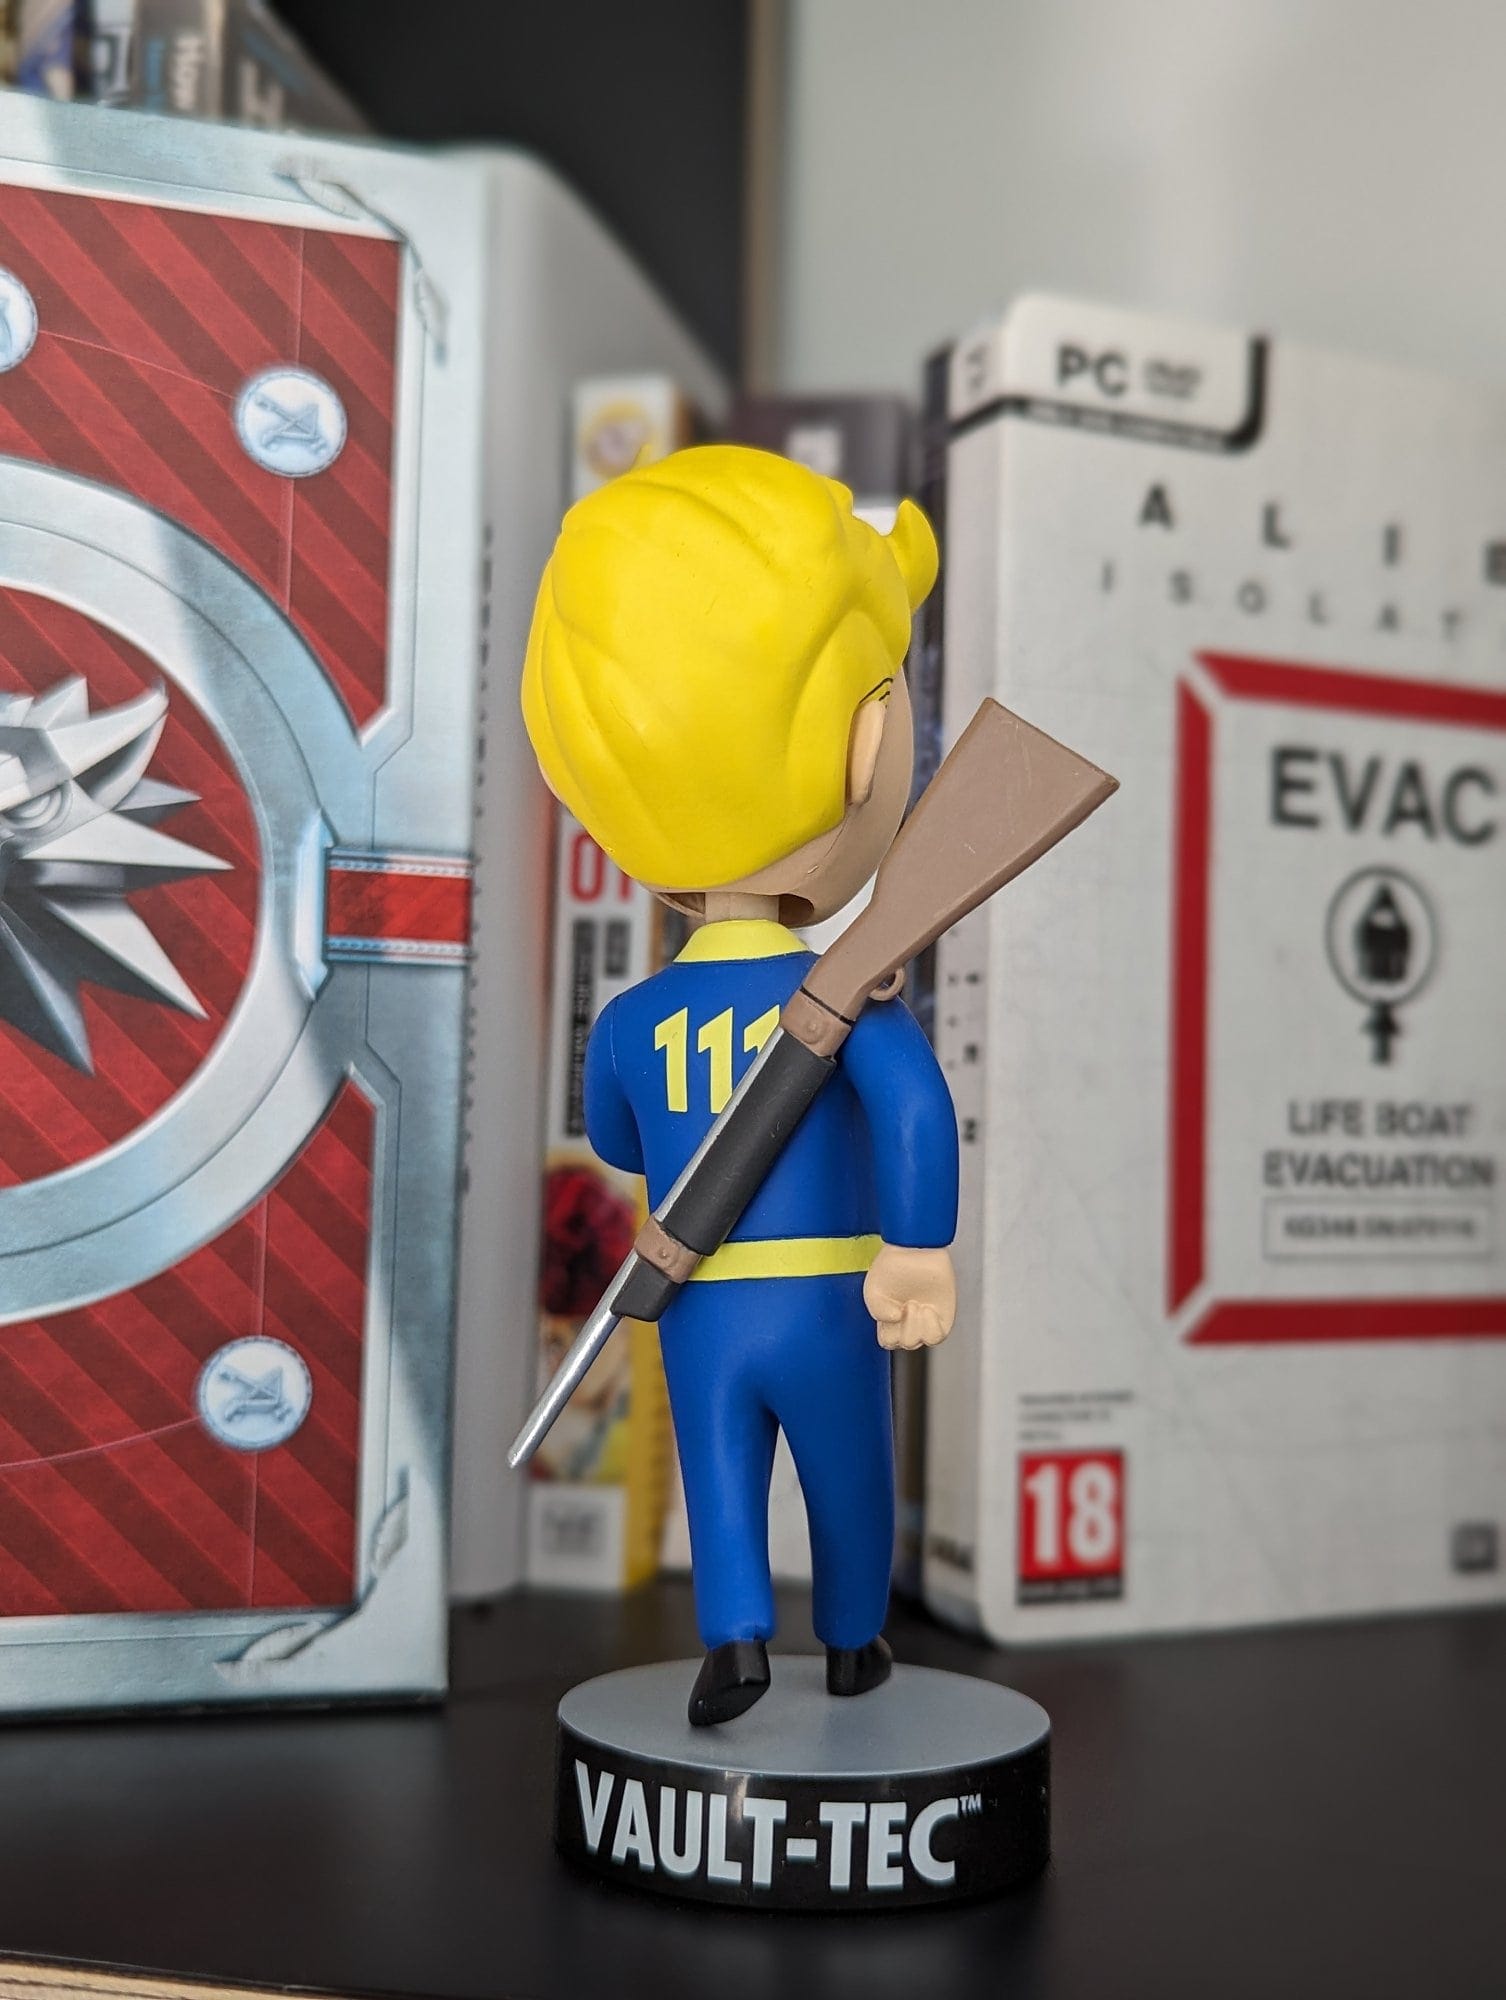 A Vault-Tec bobblehead figurine from the Fallout video game series is displayed on a shelf, with video game boxes in the background